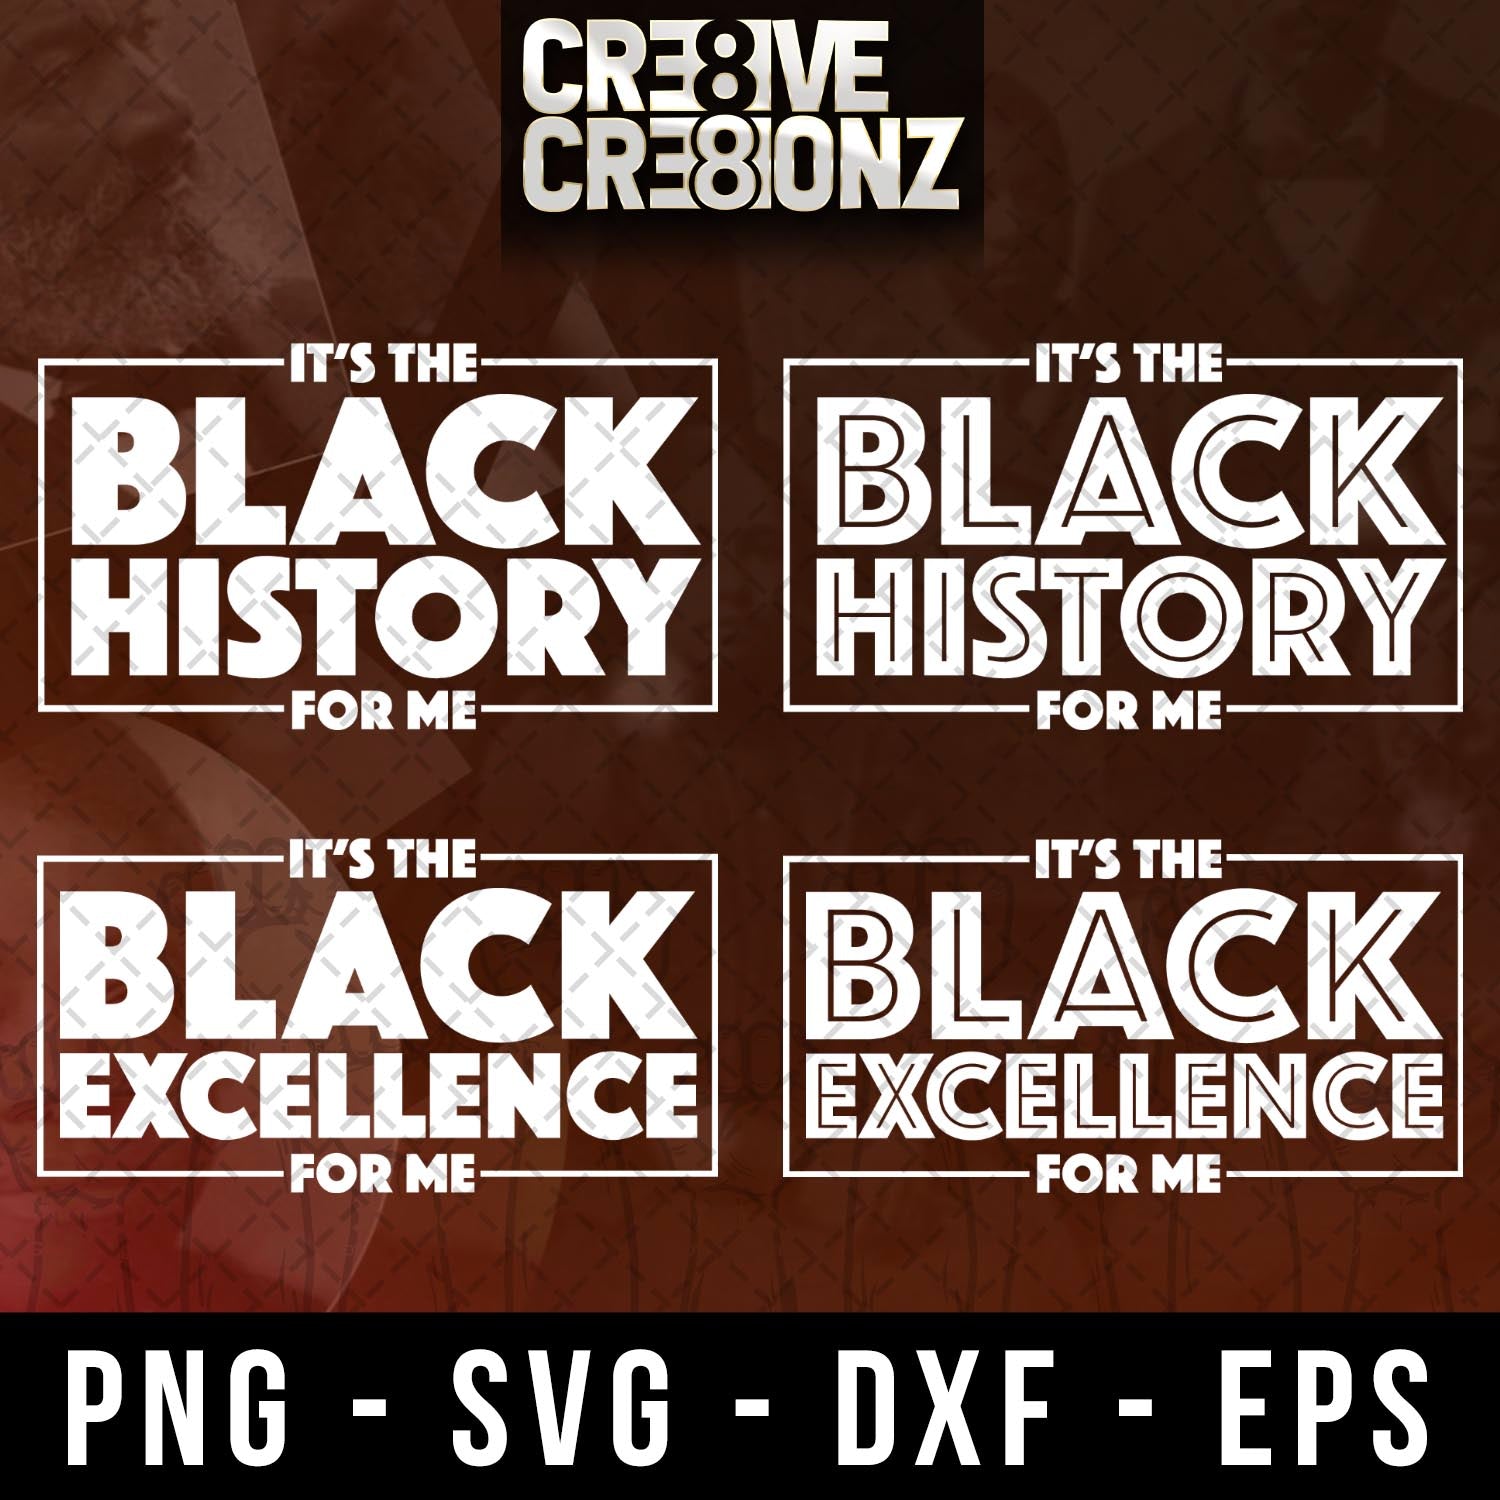 It's the Black History/Excellence For Me SVG - Cre8ive Cre8ionz